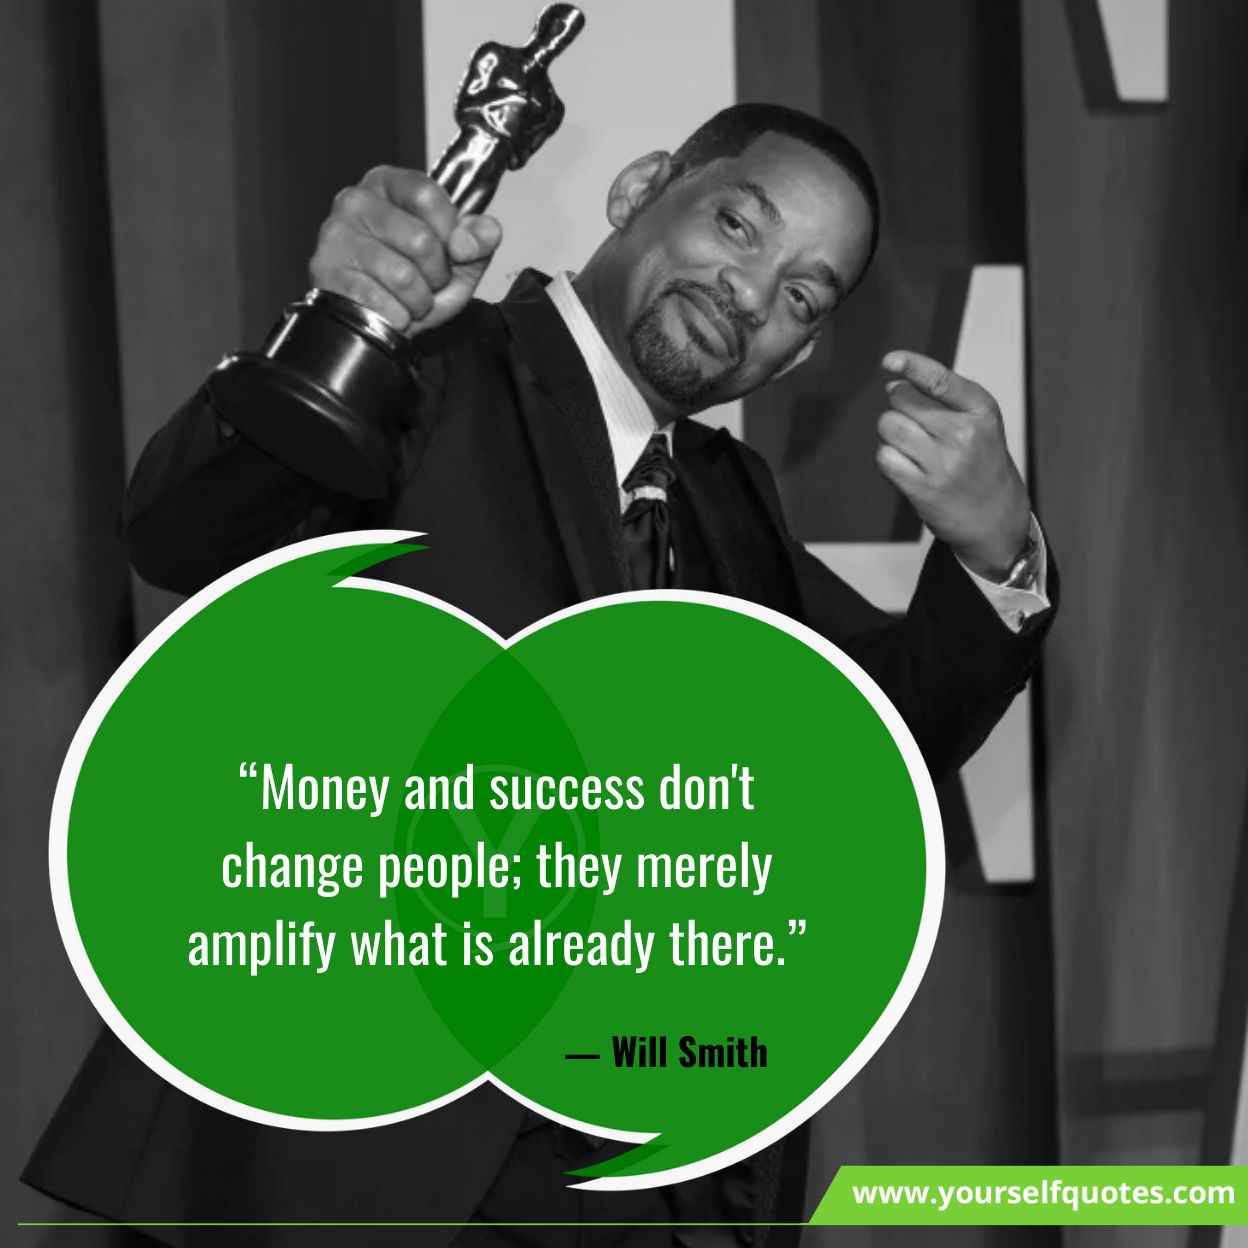 Will Smith Quotes On Success